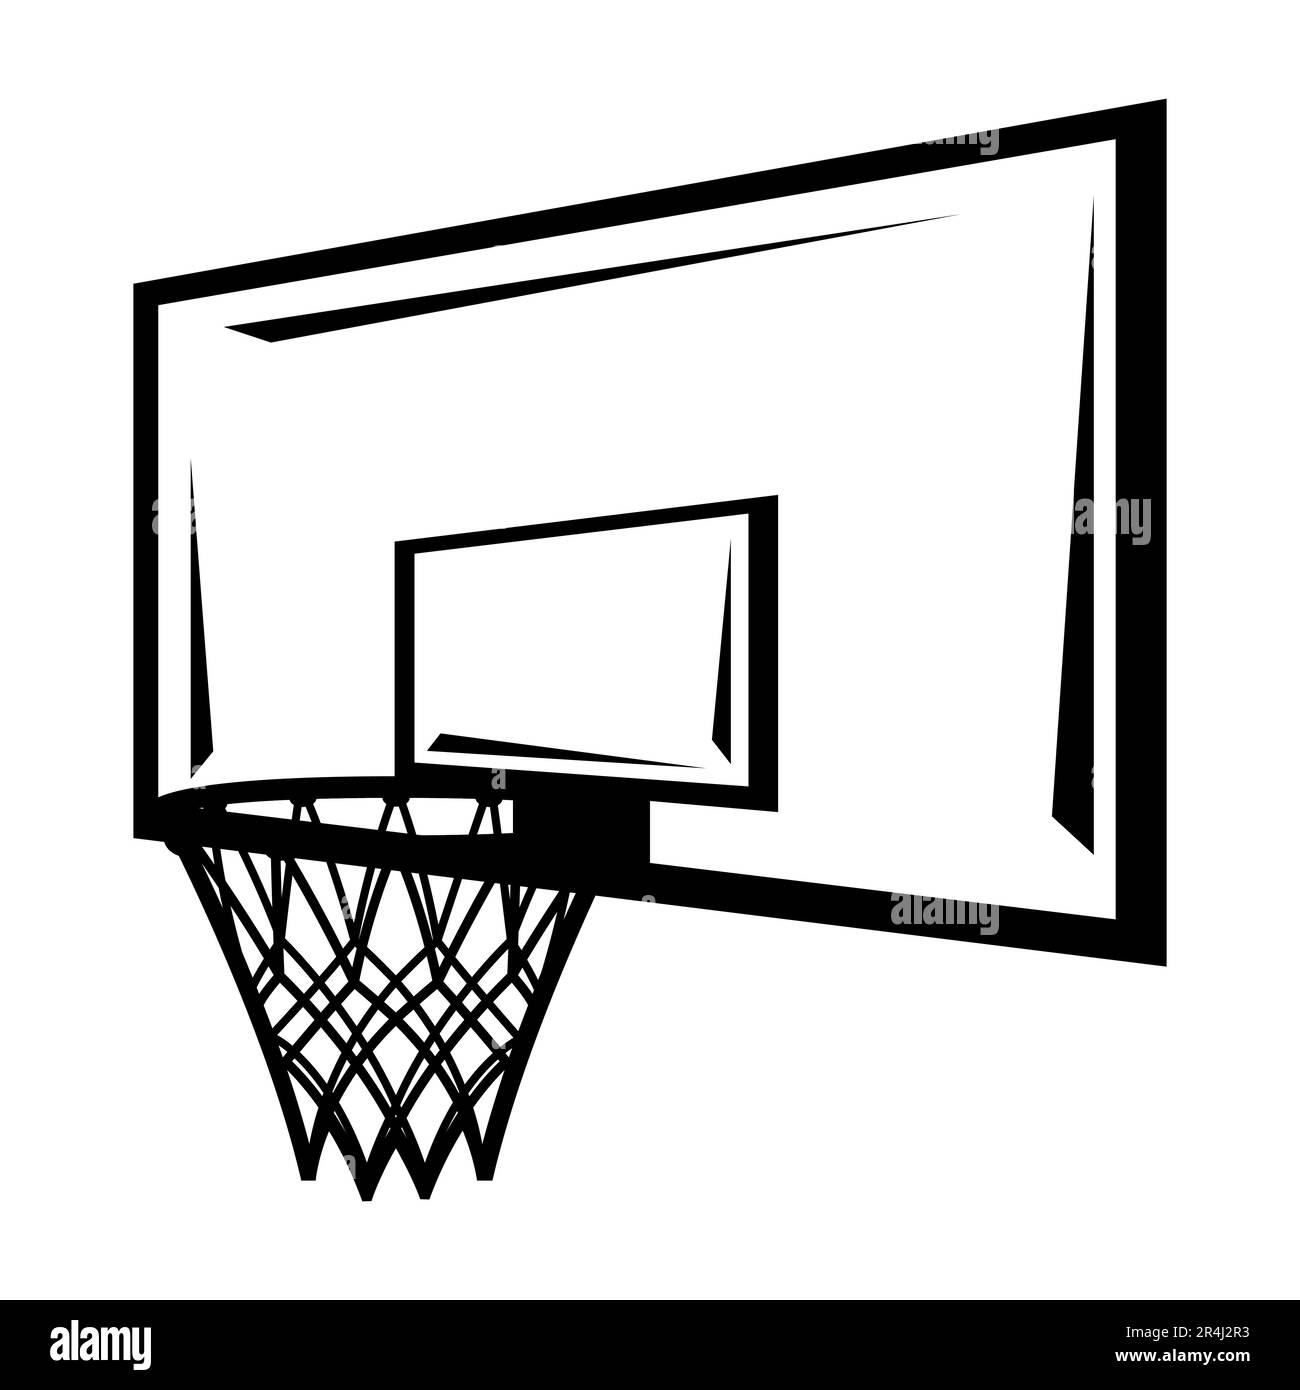 Basketball net and backboard Black and White Stock Photos & Images